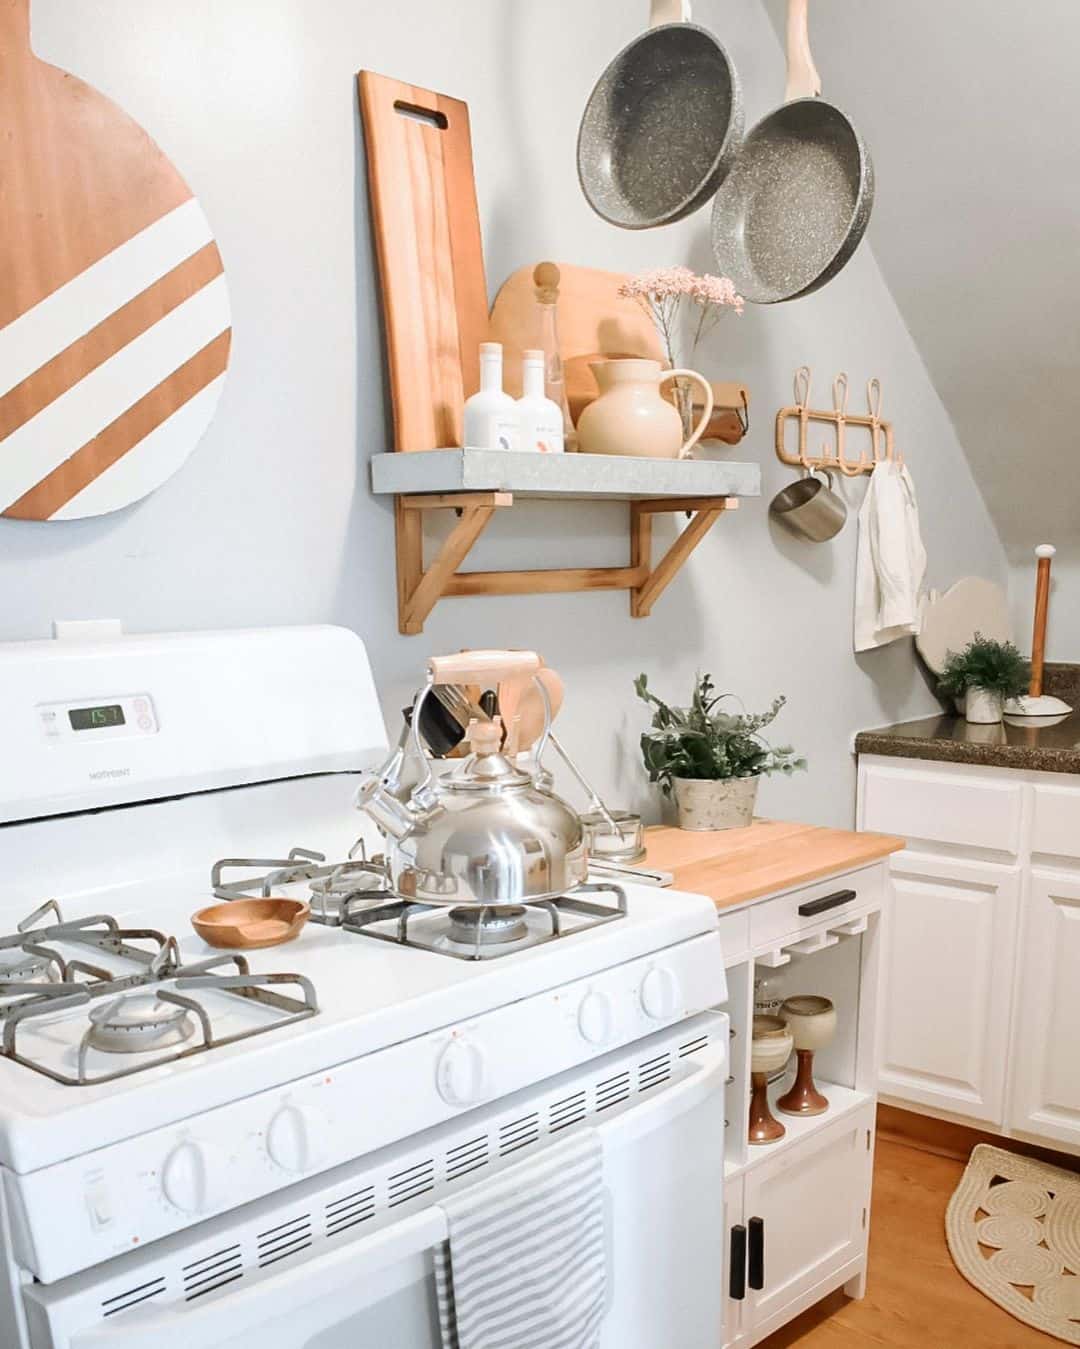 Elevating the Stove Area with Bohemian Charm